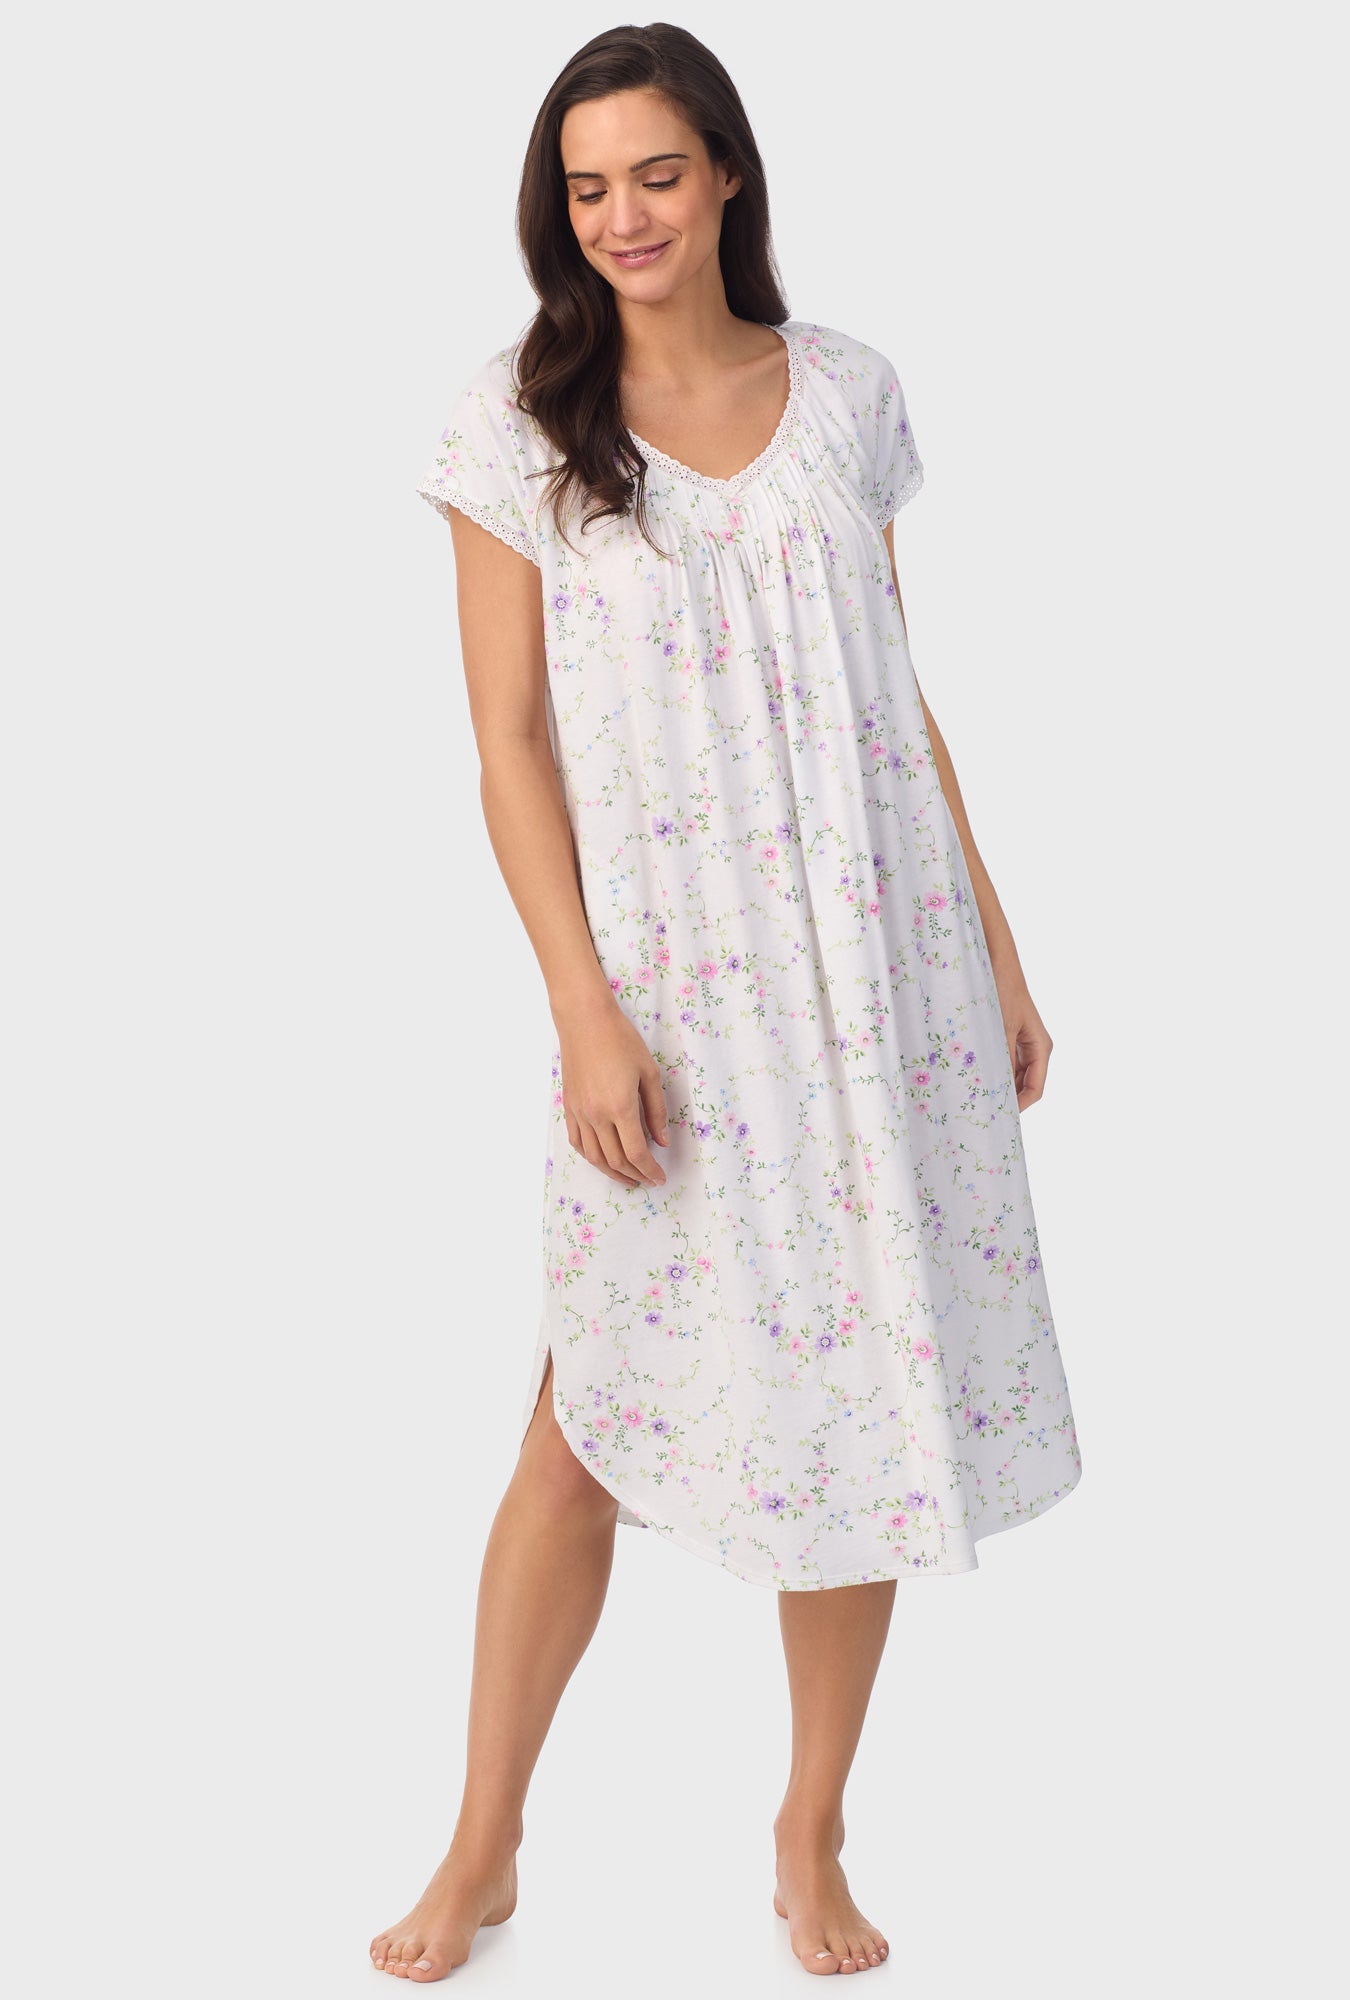 A lady wearing white short sleeve Viney Floral Cap Sleeve Nightgown with Lilac and Cherry Blossom print